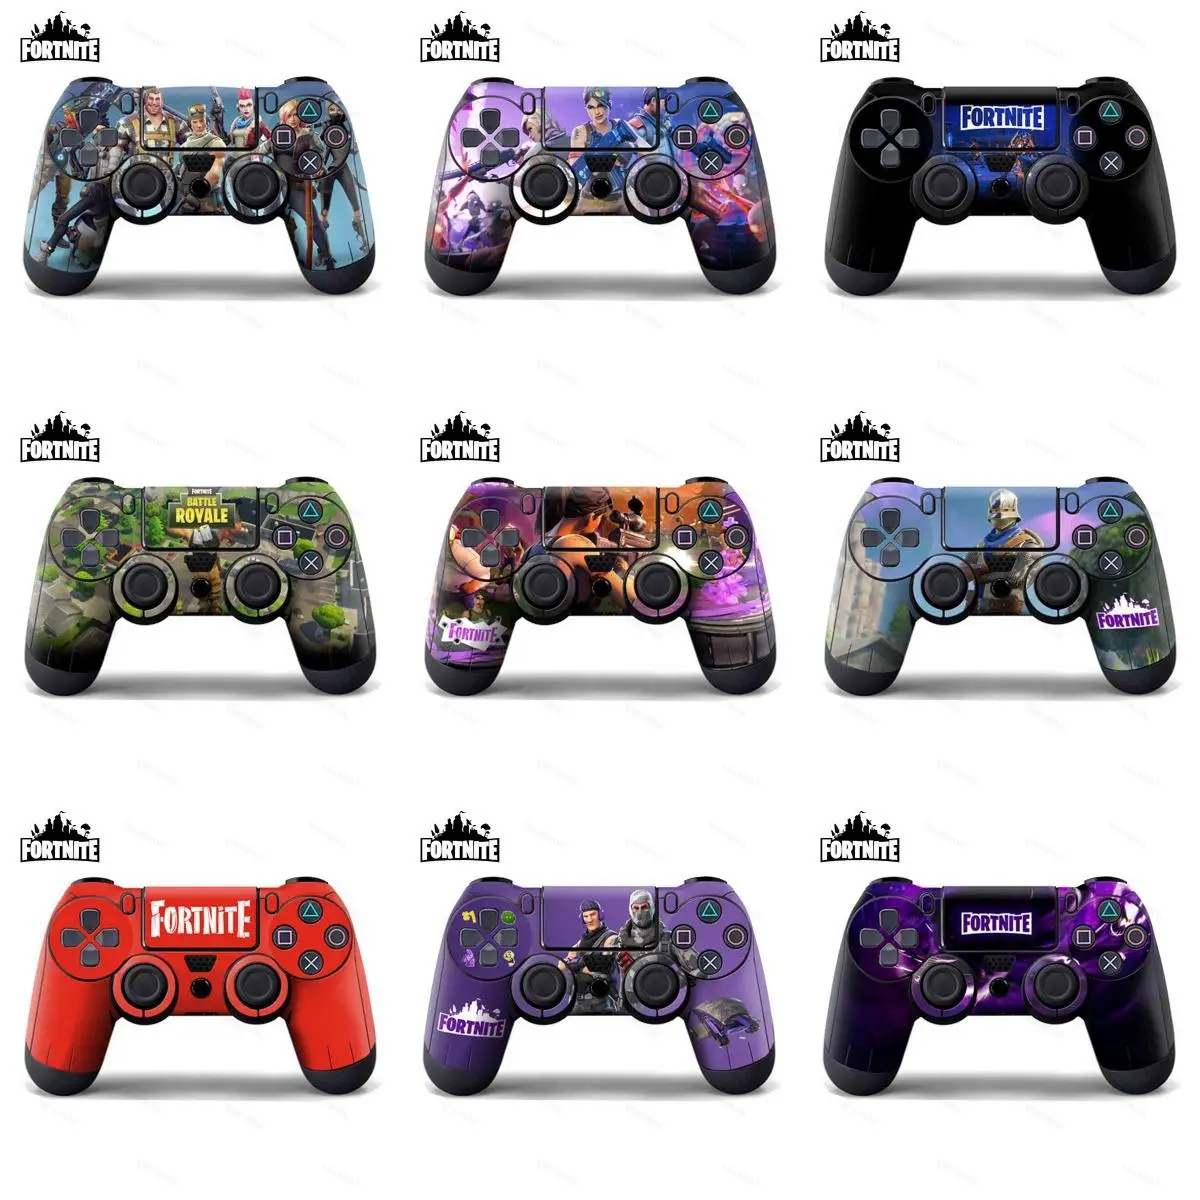 

PS4 FORTNITE Battle Royale Skin Stickers For SONY PlayStation 4 Controller Game Anti-slip Protection Decal for Console Joystick